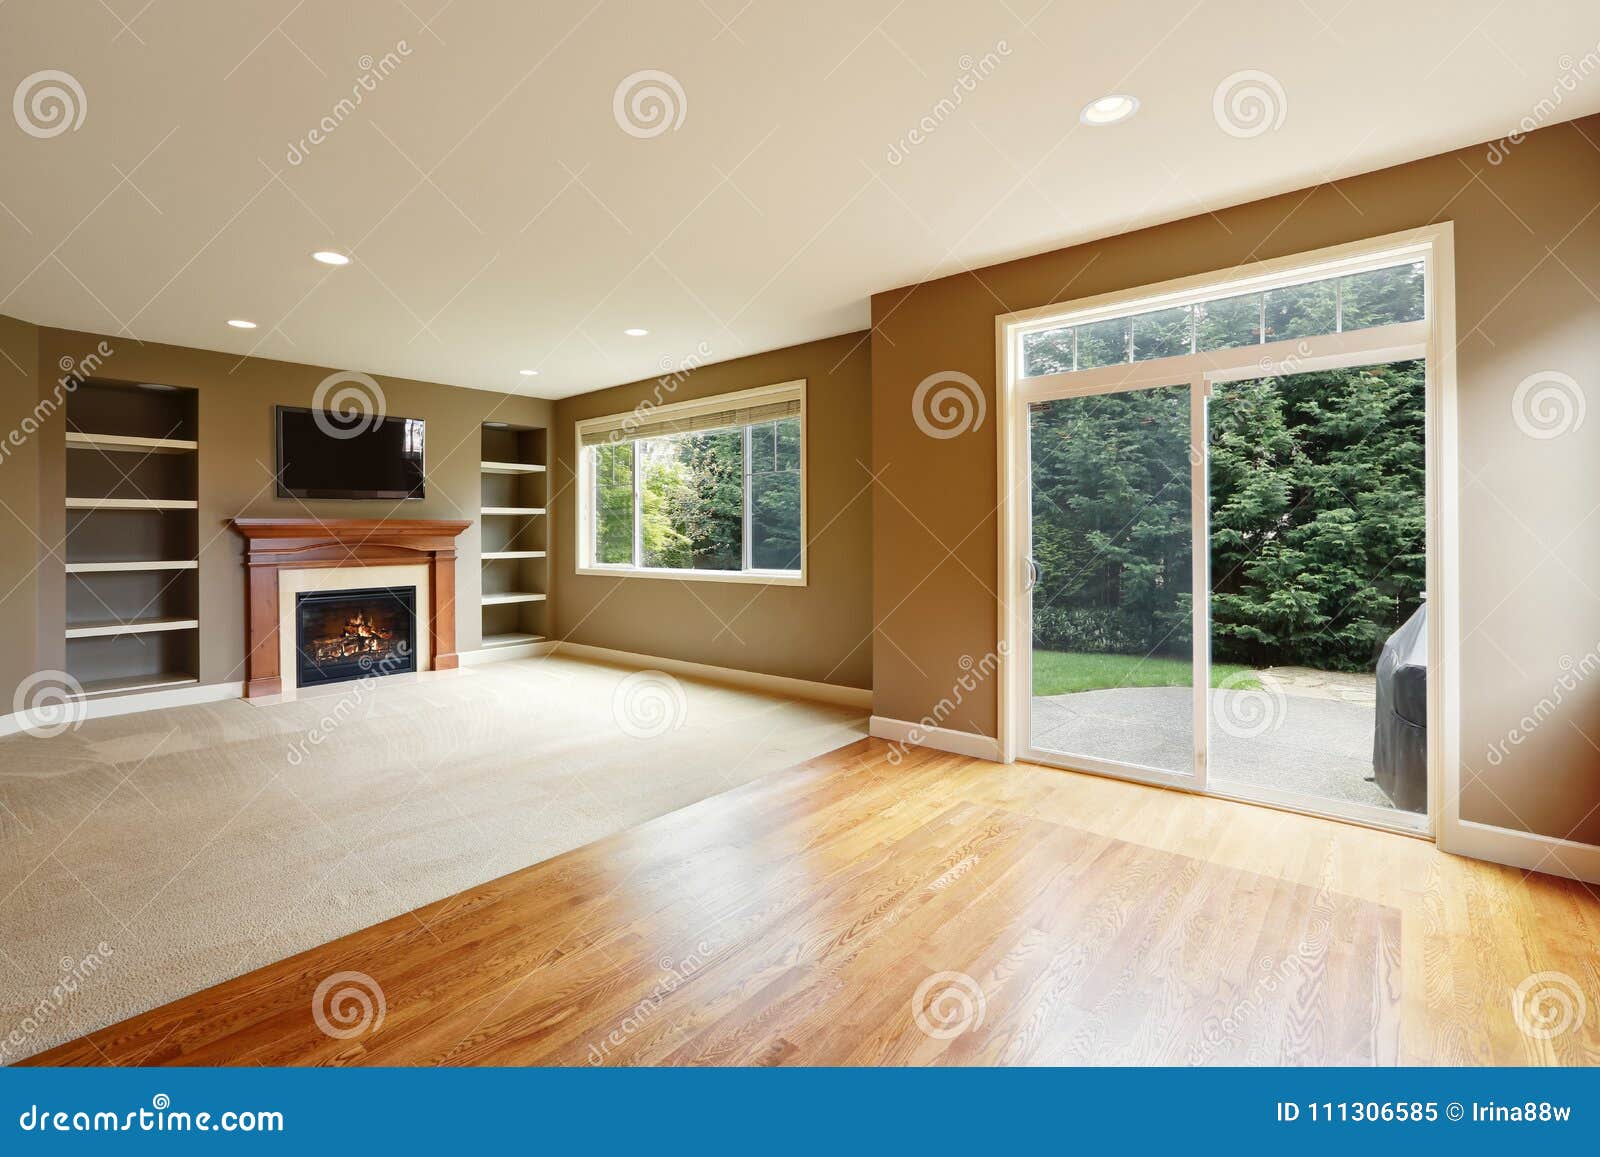 Brown Living Room Interior With Fireplace And Bookshelves Stock